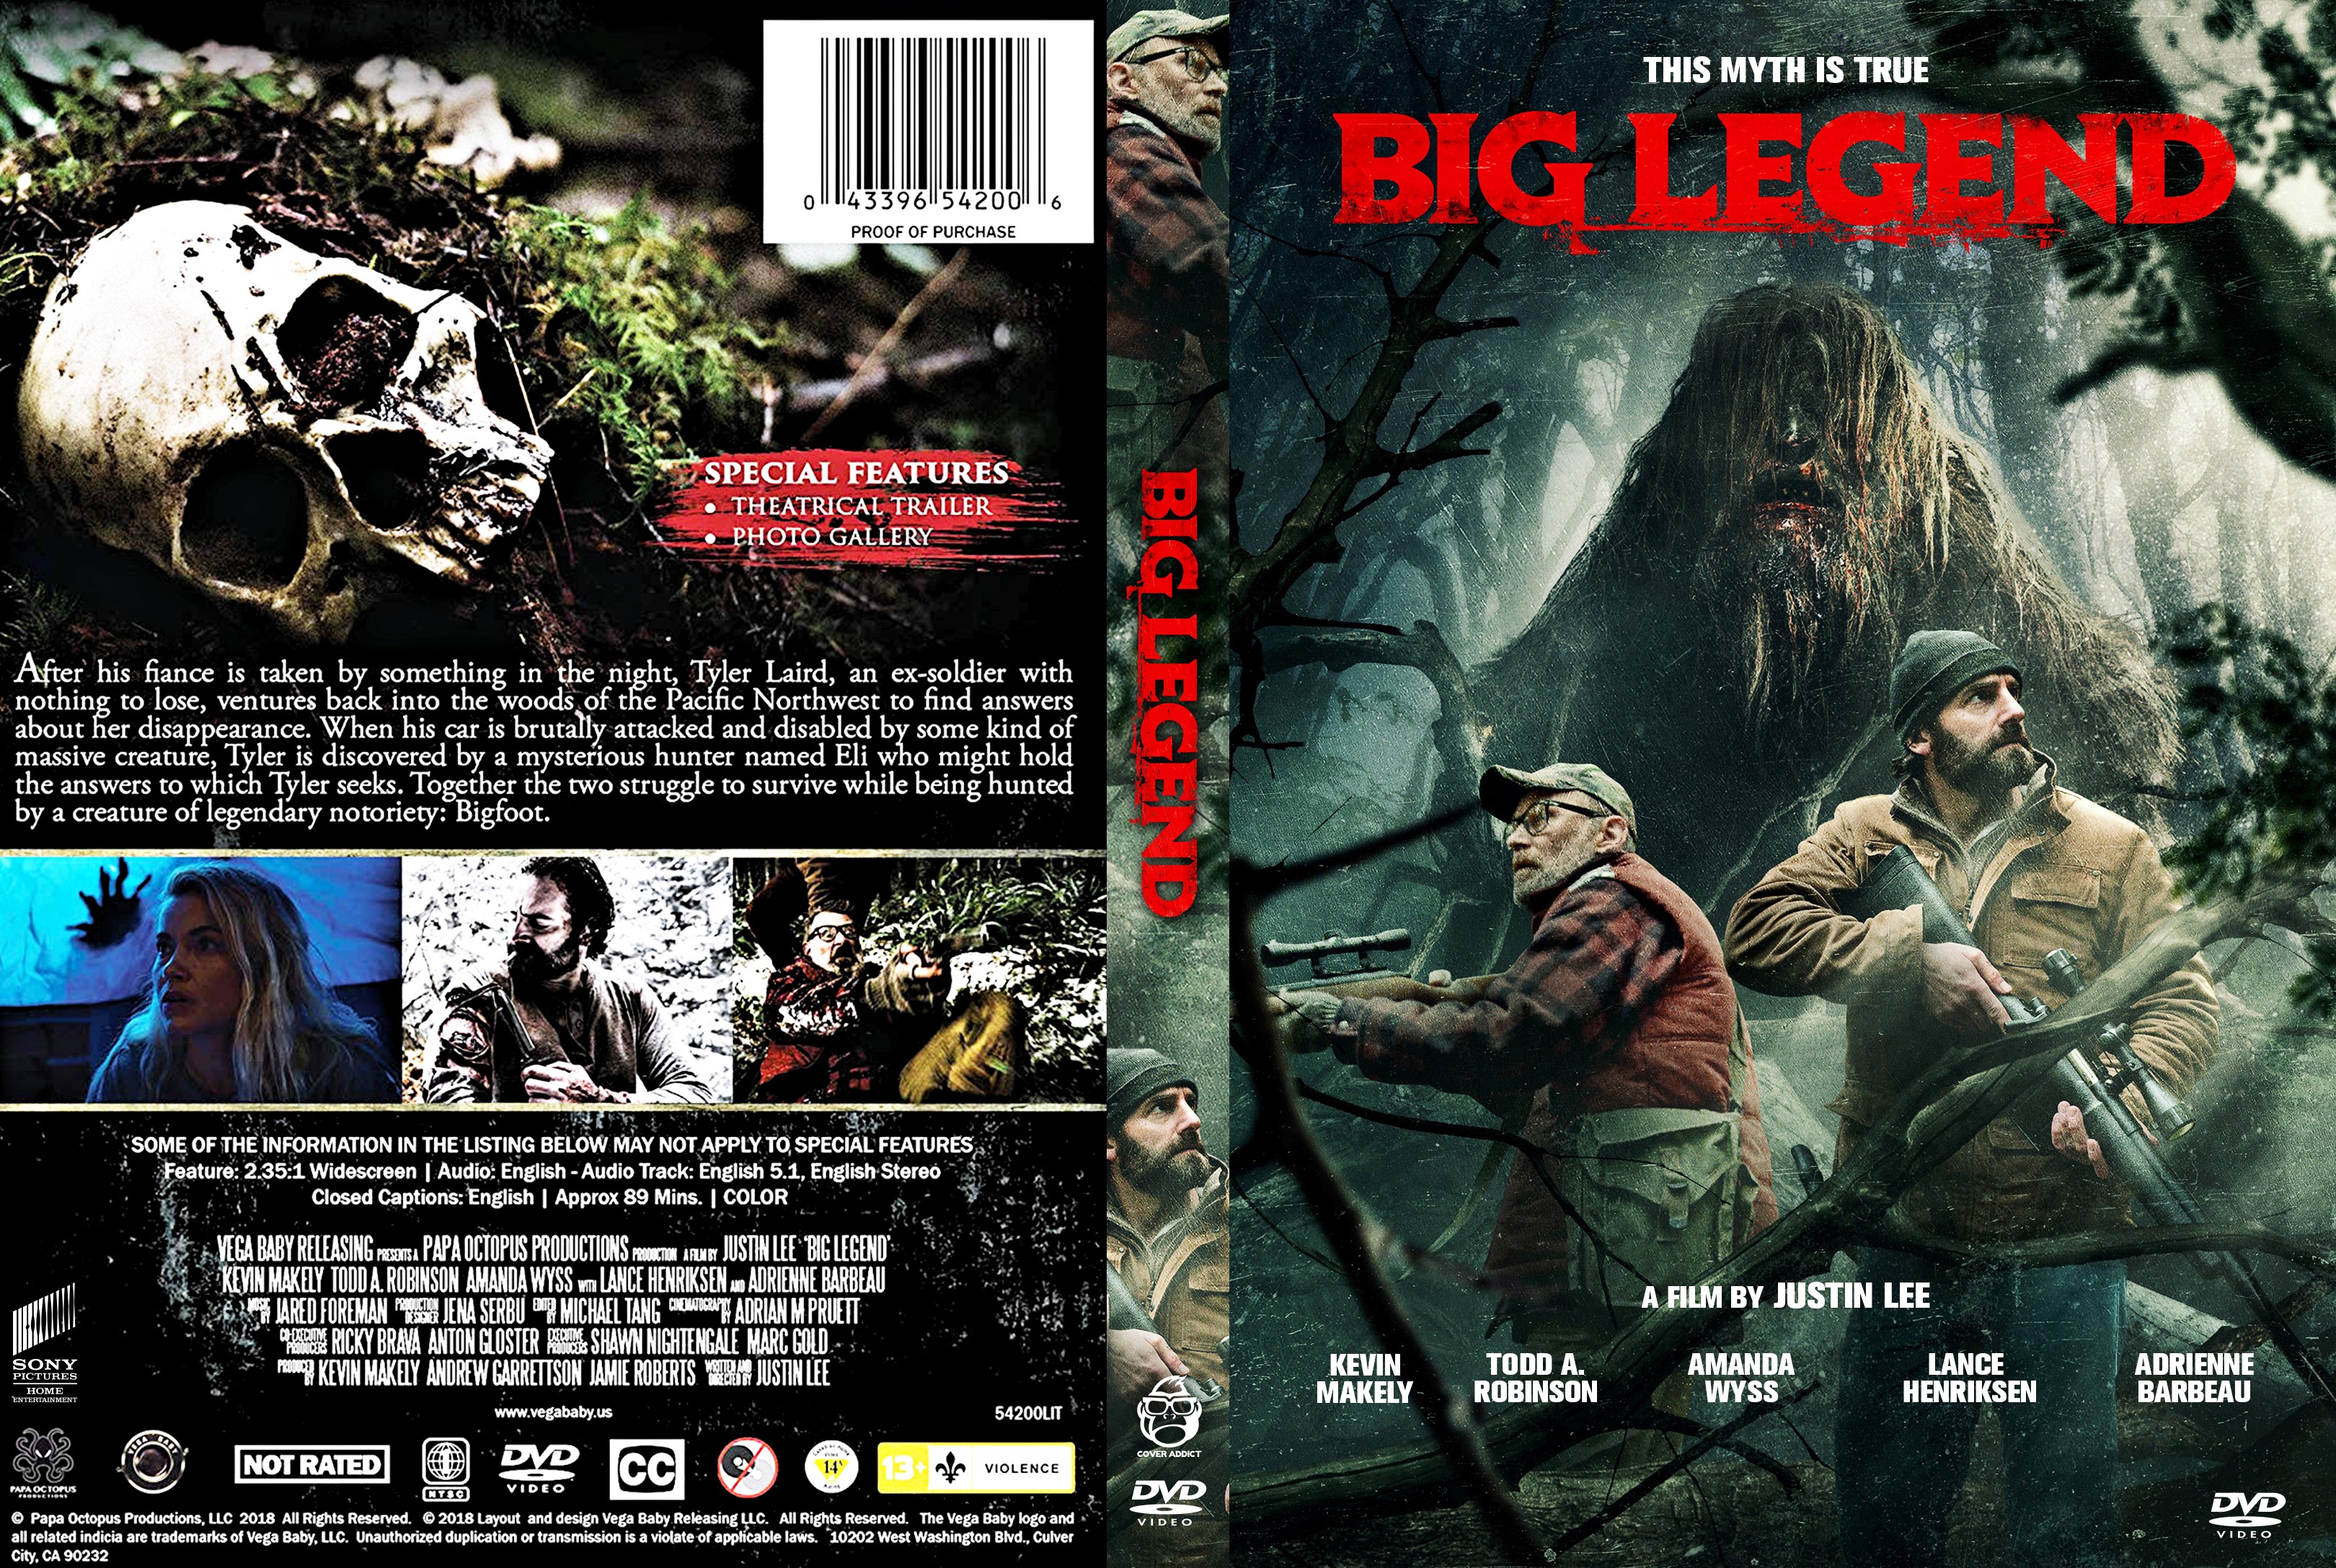 Big Legend DVD Cover - Cover Addict - DVD, Bluray Covers 